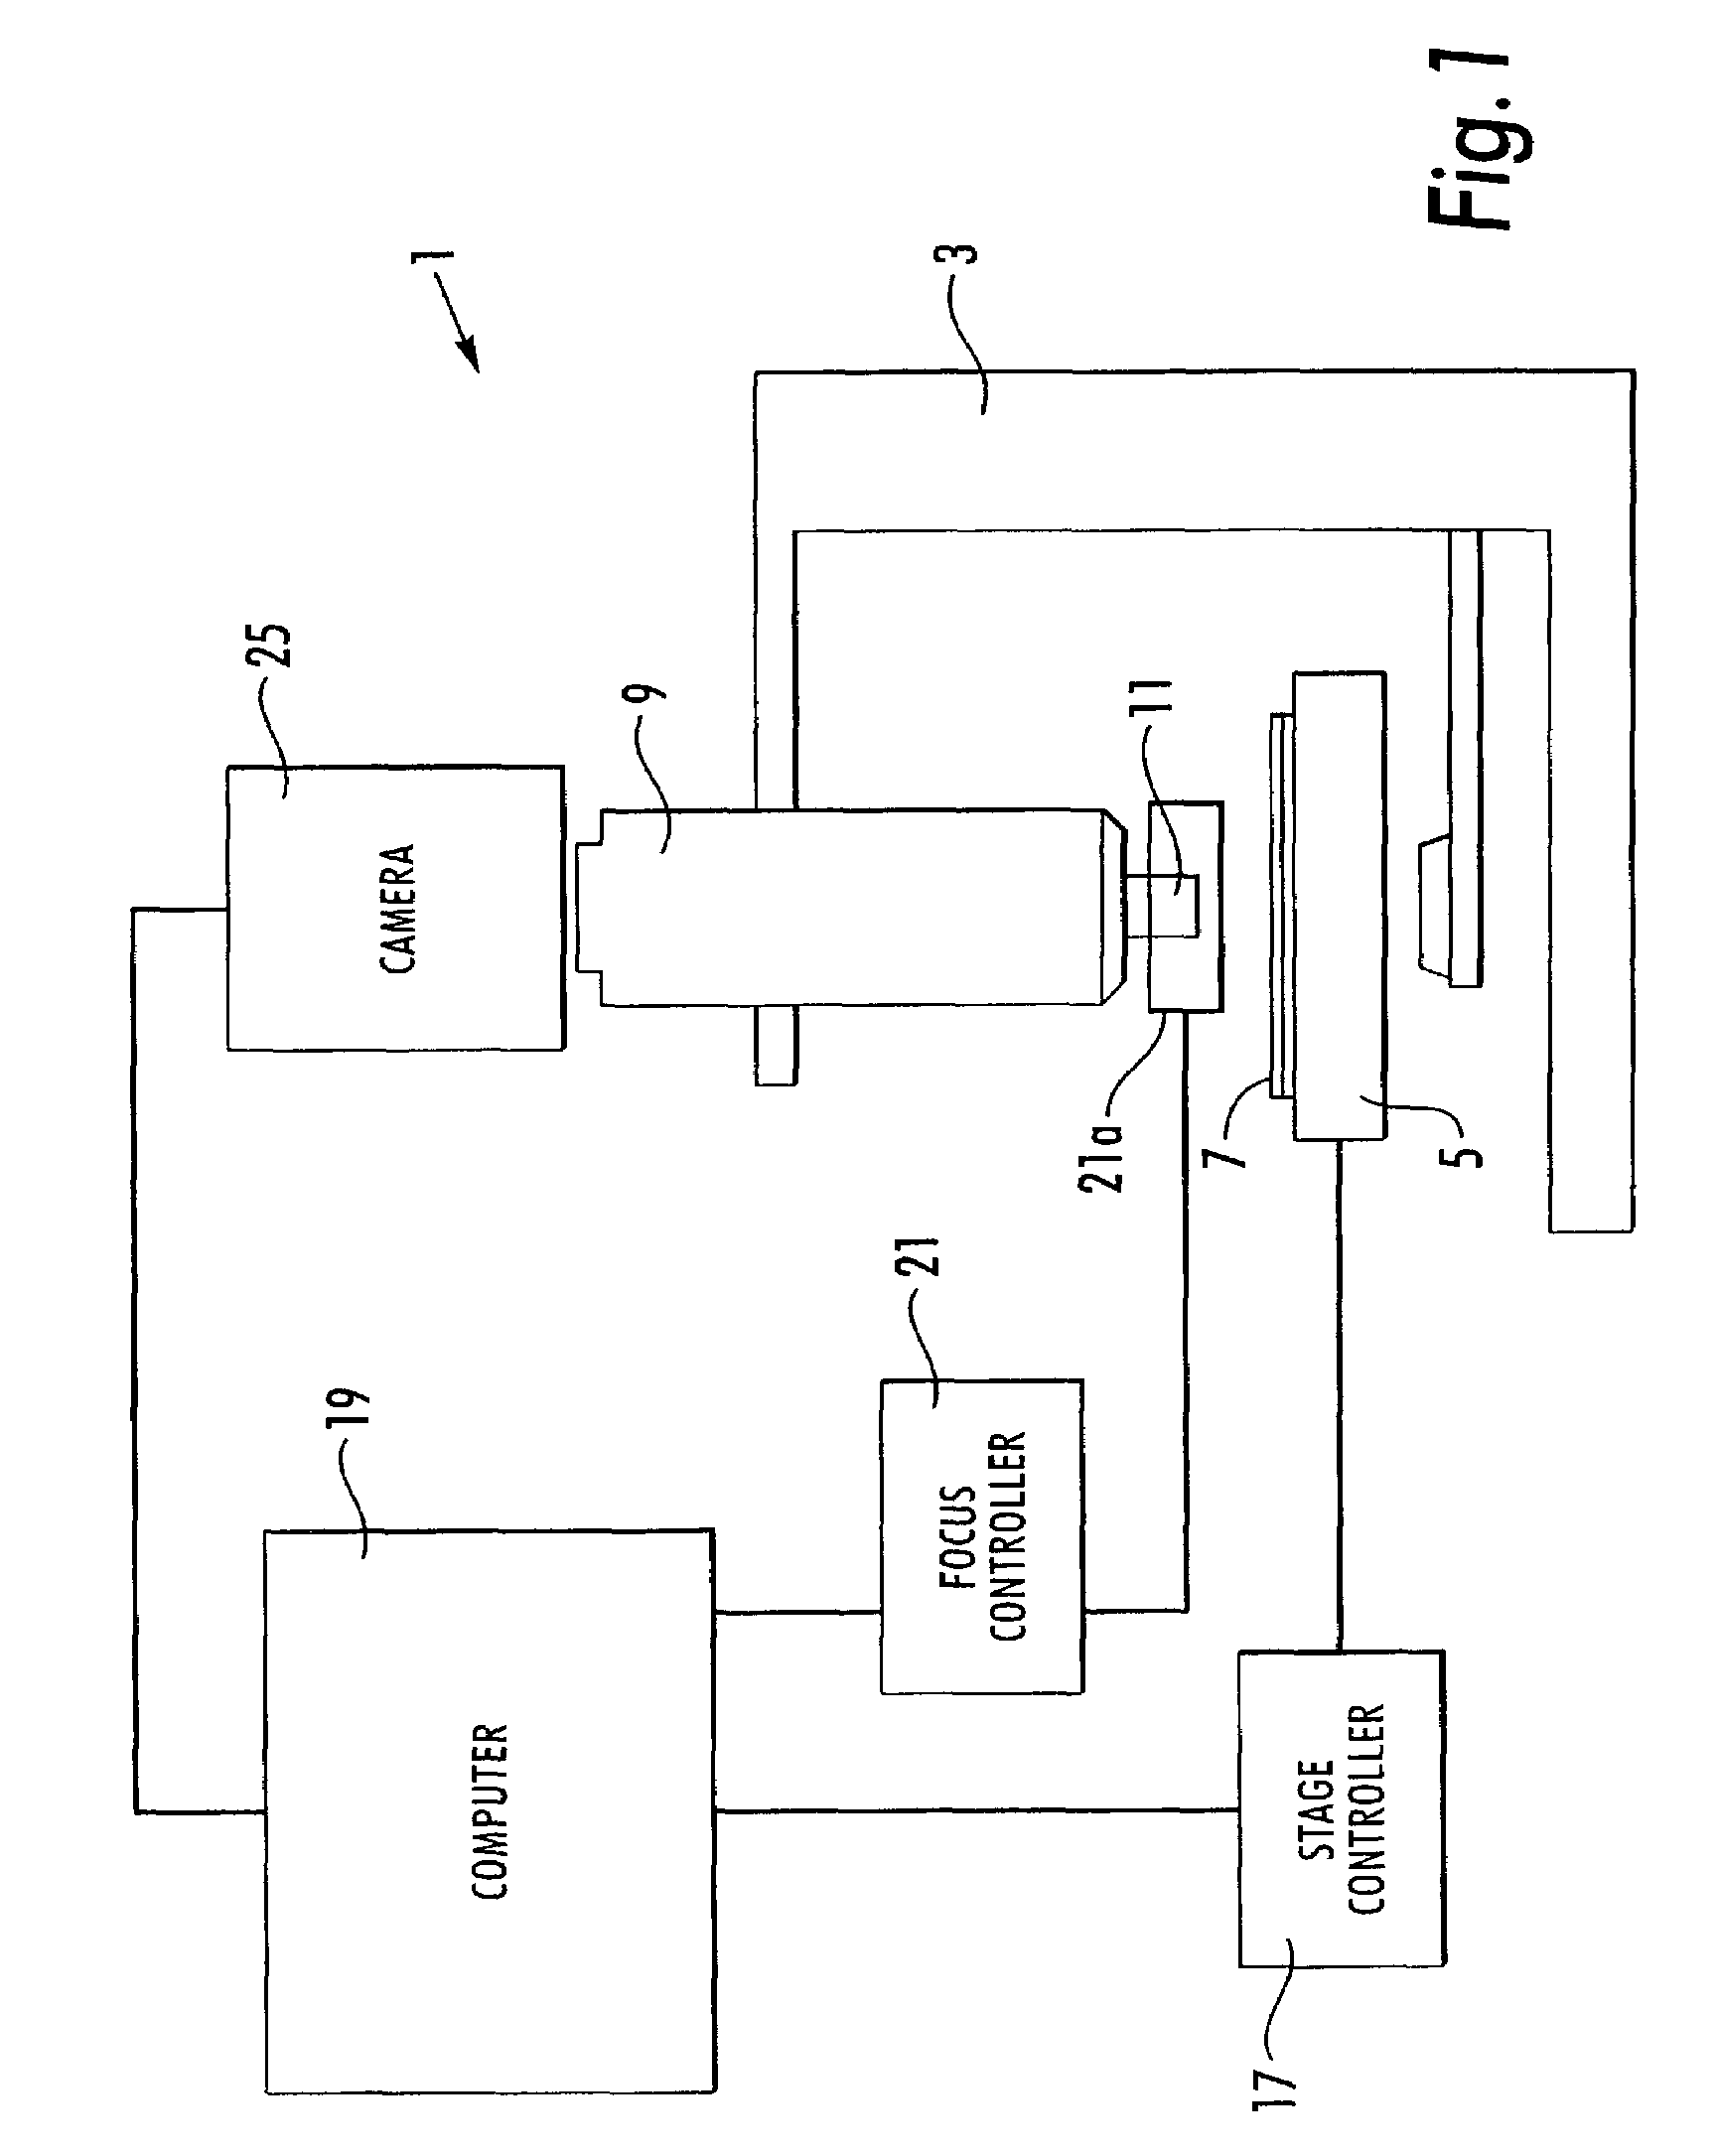 Microscopy imaging system and method